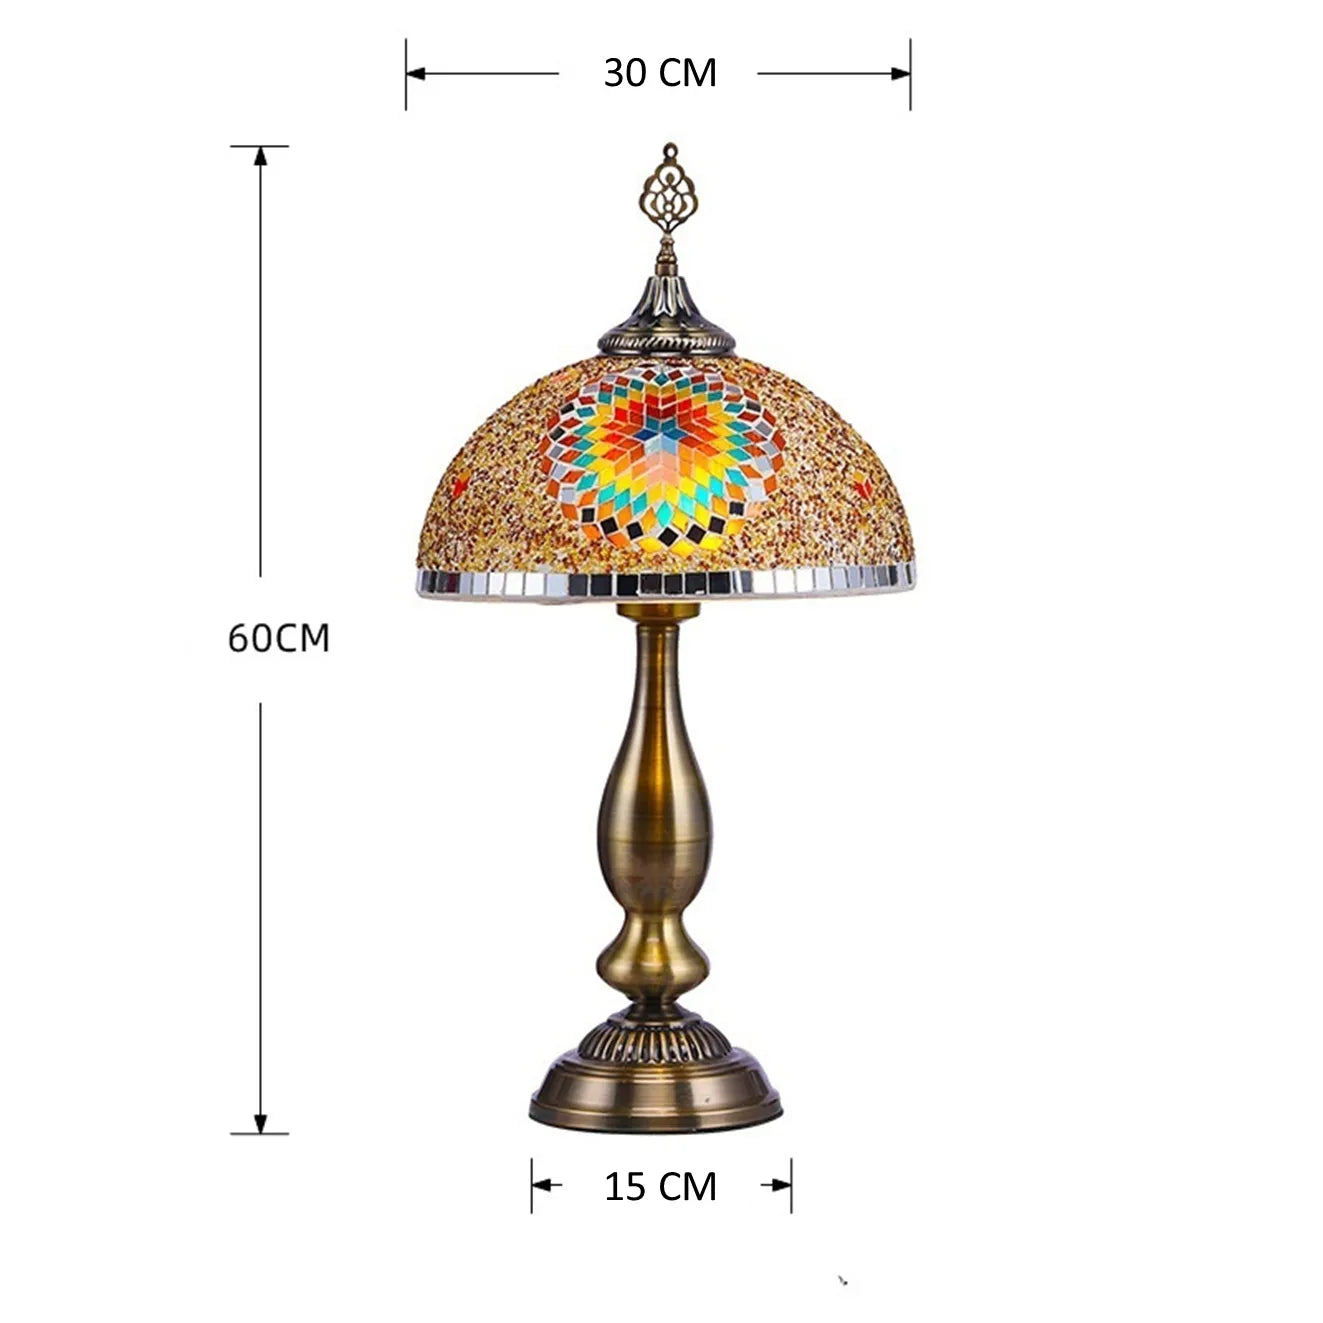 handmade-bohemian-classic-vintage-style-table-warm-light-lamp-handcrafted-home-decor-multi-colour-royal-looking-elegant-large-size-glass-metal